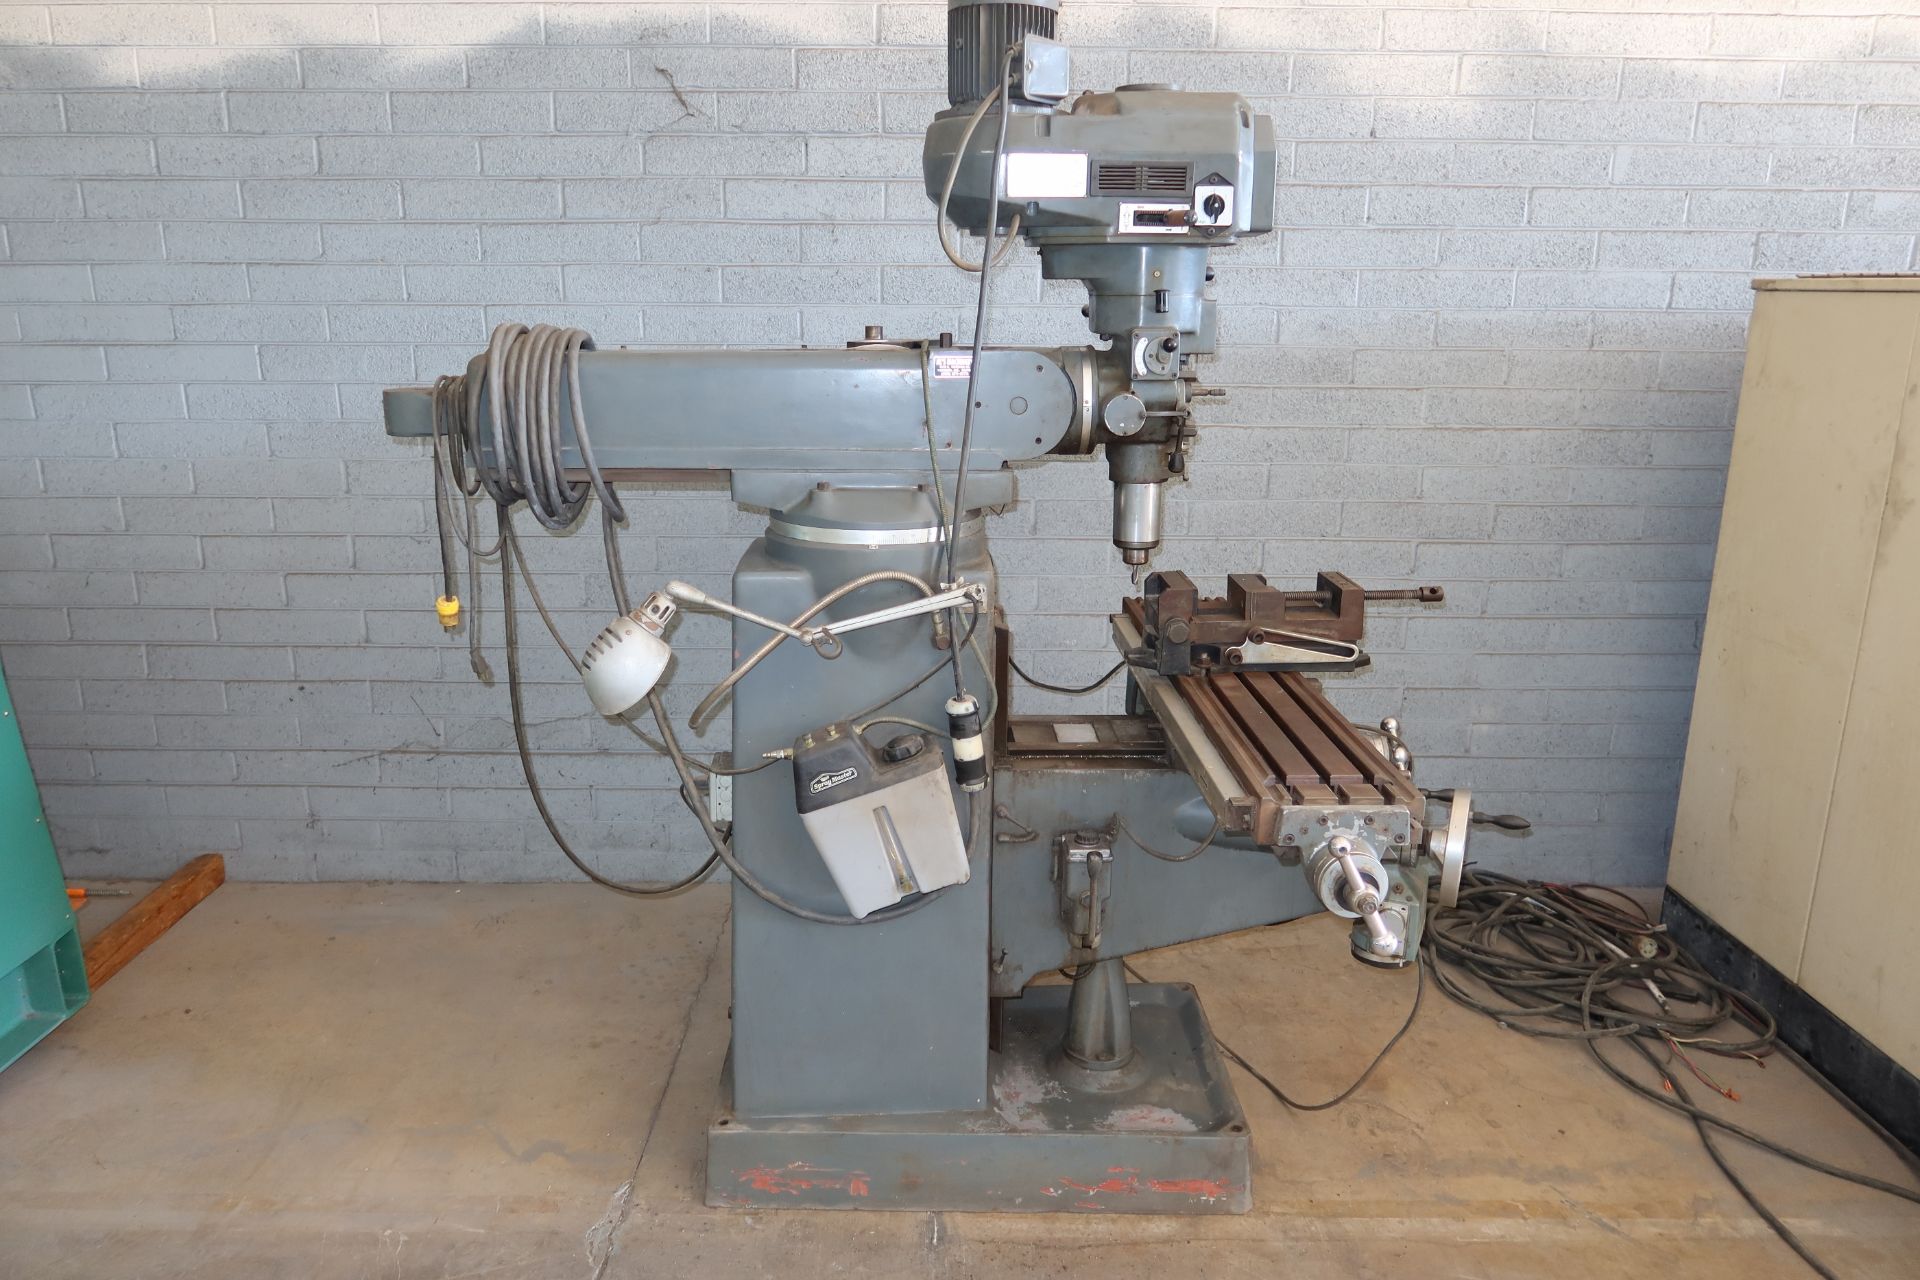 LAGUN VERTICAL MILL, POWER TABLE & KNEE, 50" X 10" TABLE, 2-AXIS DRO & MILL VISE, LOCATED: 3845 N. - Image 6 of 6